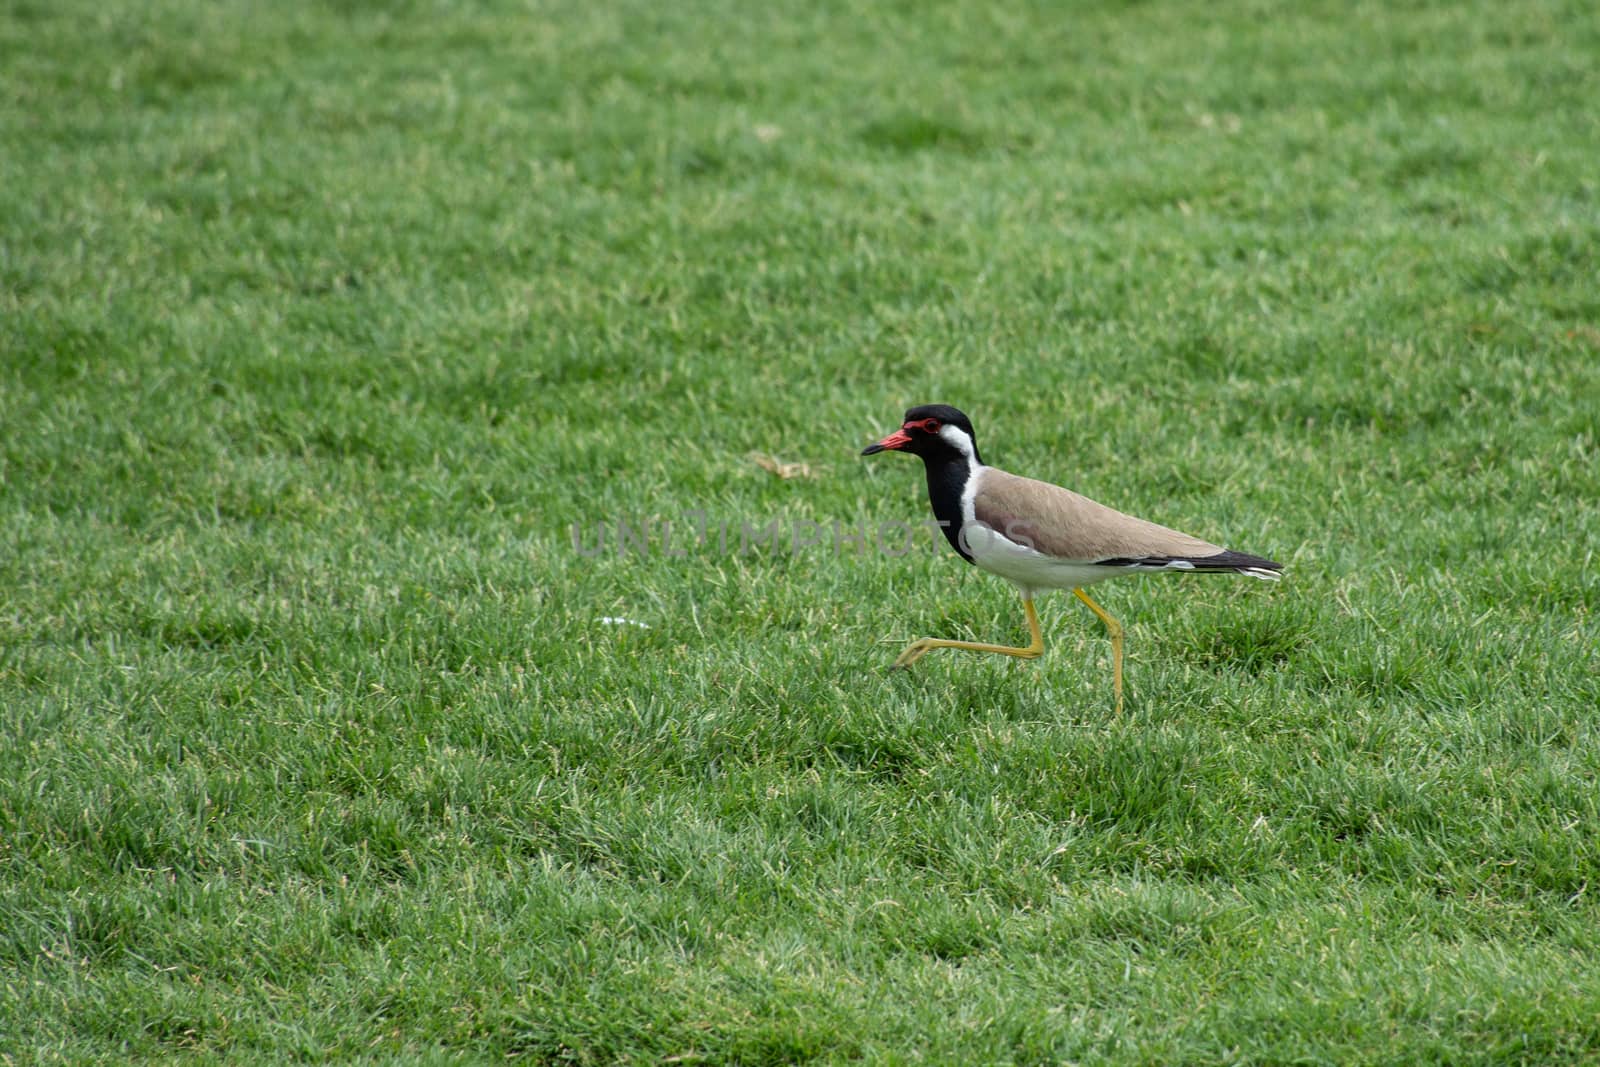 Red-Wattled Lapwing standing with its beak open on the green gra by kingmaphotos